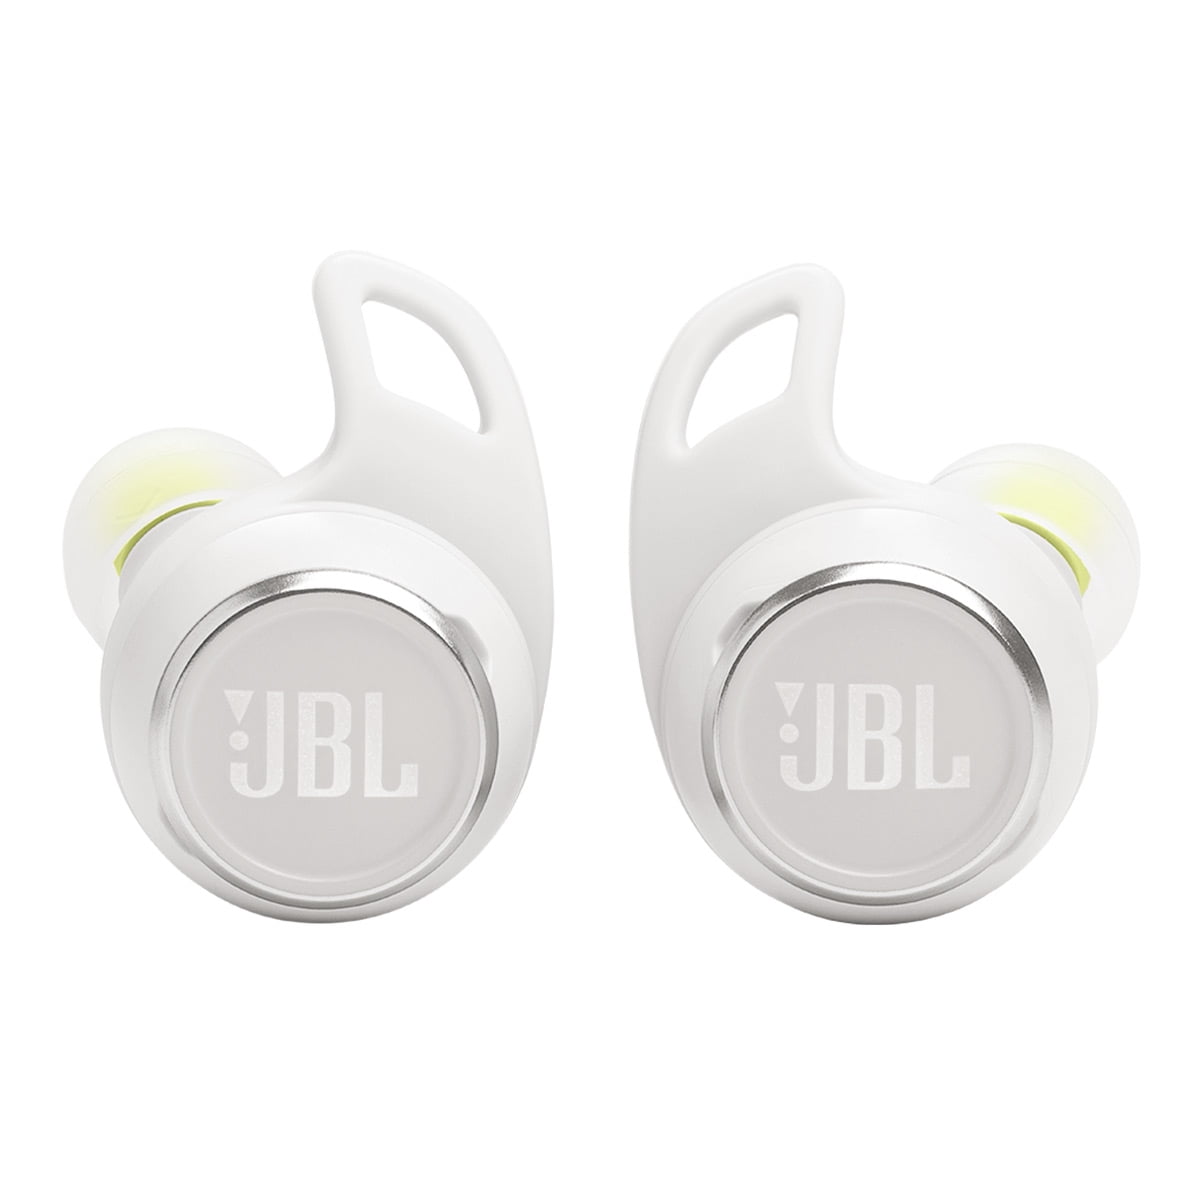 Aero JBL True Reflect with Earbuds Adaptive Wireless (White) Noise Cancelling